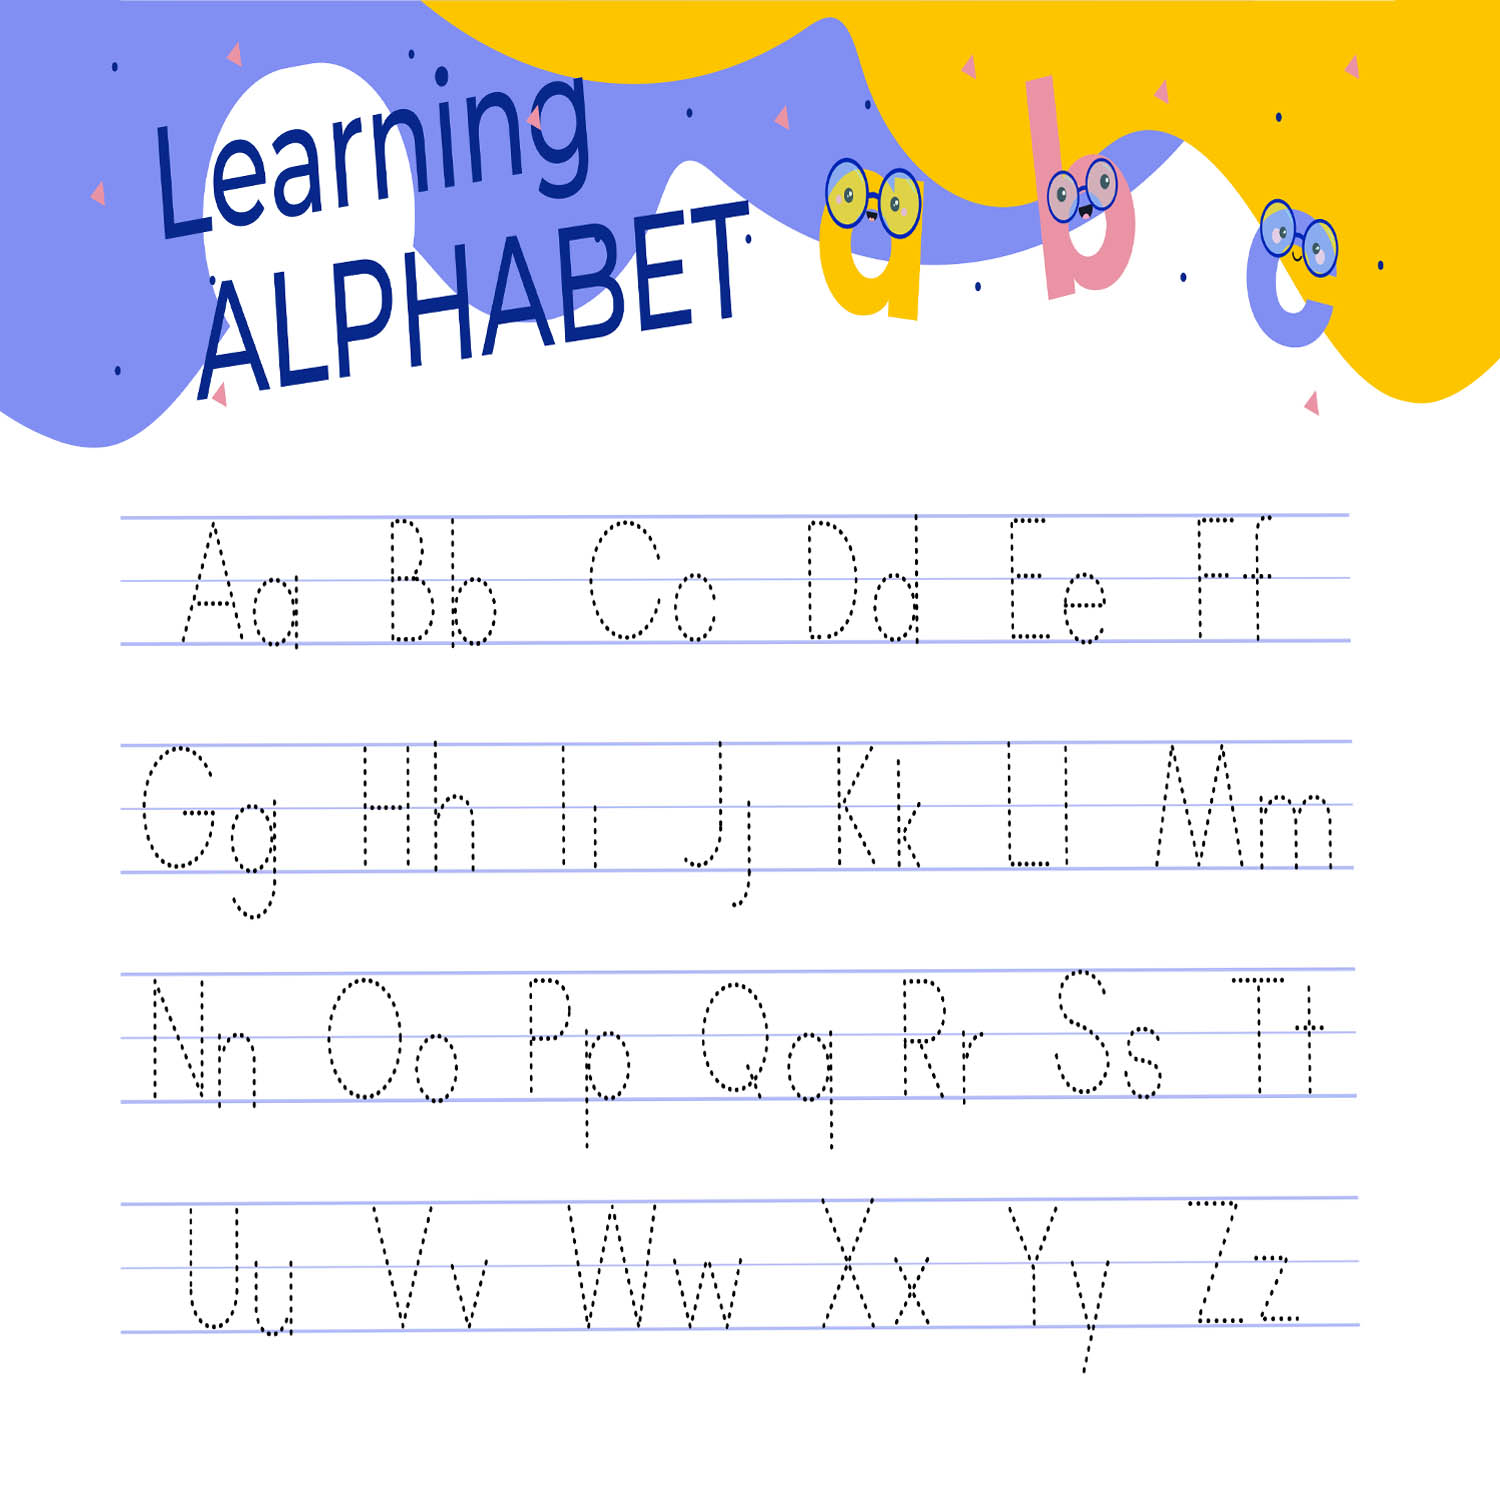 ntroducing the Master Bundle of Alphabet Tracing Worksheets - the perfect tool for helping kids learn the ABCs in a fun and engaging way! This bundle includes a wide variety of worksheets for every letter of the alphabet, all expertly designed to help young learners practice their handwriting and letter recognition skills Each worksheet features a large, bold letter for tracing, along with accompanying images that start with that letter to reinforce vocabulary and phonetic awareness These worksheets are perfect for parents, teachers, and homeschoolers looking for a comprehensive and easy-to-use resource for teaching the ABCs The worksheets are suitable for children aged 3-6 years old and are ideal for use in the classroom or at home With this Master Bundle, you'll have access to a wide variety of different tracing styles, including print, cursive, and lowercase letters, so you can choose the best fit for your child's learning needs Plus, with the bundle's affordable price, you'll have a wealth of resources at your fingertips for a fraction of the cost it would take to create custom worksheets So whether you're a parent looking to give your child a head start in their education, or a teacher seeking a versatile and effective tool for your classroom, the Master Bundle of Alphabet Tracing Worksheets is the perfect solution Get your bundle today and help your child master the ABCs with ease! User passive income for graphic designer ChatGPT As a graphic designer, there are several passive income streams you can explore to generate revenue without actively trading time for money Here are a few ideas to get you started: Sell digital products: You can create and sell digital products such as fonts, icons, illustrations, templates, and graphics on platforms like Creative Market, Etsy, or your own website Once you've created your product, you can continue to earn revenue from it without any additional effort Sell print-on-demand products: Another option is to create designs for print-on-demand products like t-shirts, mugs, or phone cases, and sell them through platforms like Redbubble or Society6 You'll earn a commission on each sale without having to handle production or shipping License your designs: You can also license your designs to companies or individuals for use in their own products or projects For example, you could license your designs for use in greeting cards, book covers, or websites You'll earn royalties on each use of your design Create and sell courses: If you have expertise in a particular area of graphic design, you could create an online course or tutorial series and sell it on platforms like Udemy or Skillshare Once you've created the course, you'll earn passive income from each sale Build an affiliate marketing program: Finally, you could build an affiliate marketing program for your digital products or services This involves partnering with other websites or influencers who promote your products to their audiences You'll earn a commission on each sale that comes from their referral Remember, building a passive income stream takes time and effort upfront But once you've created your product or established your program, it can generate revenue for years to come with minimal ongoing effort So start exploring your options and find the best fit for your skills and interests! User in which platform ChatGPT There are several platforms you can use to generate passive income as a graphic designer Here are some examples: Creative Market: This platform allows you to sell digital products like fonts, icons, illustrations, templates, and graphics to a global audience of designers and creatives Etsy: Etsy is an online marketplace where you can sell handmade or vintage items, including digital products like printable art, stationery, or planner inserts Redbubble: This print-on-demand platform allows you to create designs for a variety of products like t-shirts, stickers, phone cases, and home decor items Society6: Similar to Redbubble, Society6 allows you to create and sell designs for various print-on-demand products like wall art, home decor, and fashion accessories Udemy: This platform allows you to create and sell online courses on various topics, including graphic design Skillshare: Similar to Udemy, Skillshare is an online learning platform where you can create and sell courses on various subjects, including graphic design Affiliate marketing networks: You can partner with affiliate marketing networks like Amazon Associates, ShareASale, or Commission Junction to promote your products and services to a wider audience Of course, there are many other platforms and opportunities available, so it's worth researching and exploring your options to find the best fit for your skills and goals preview image.